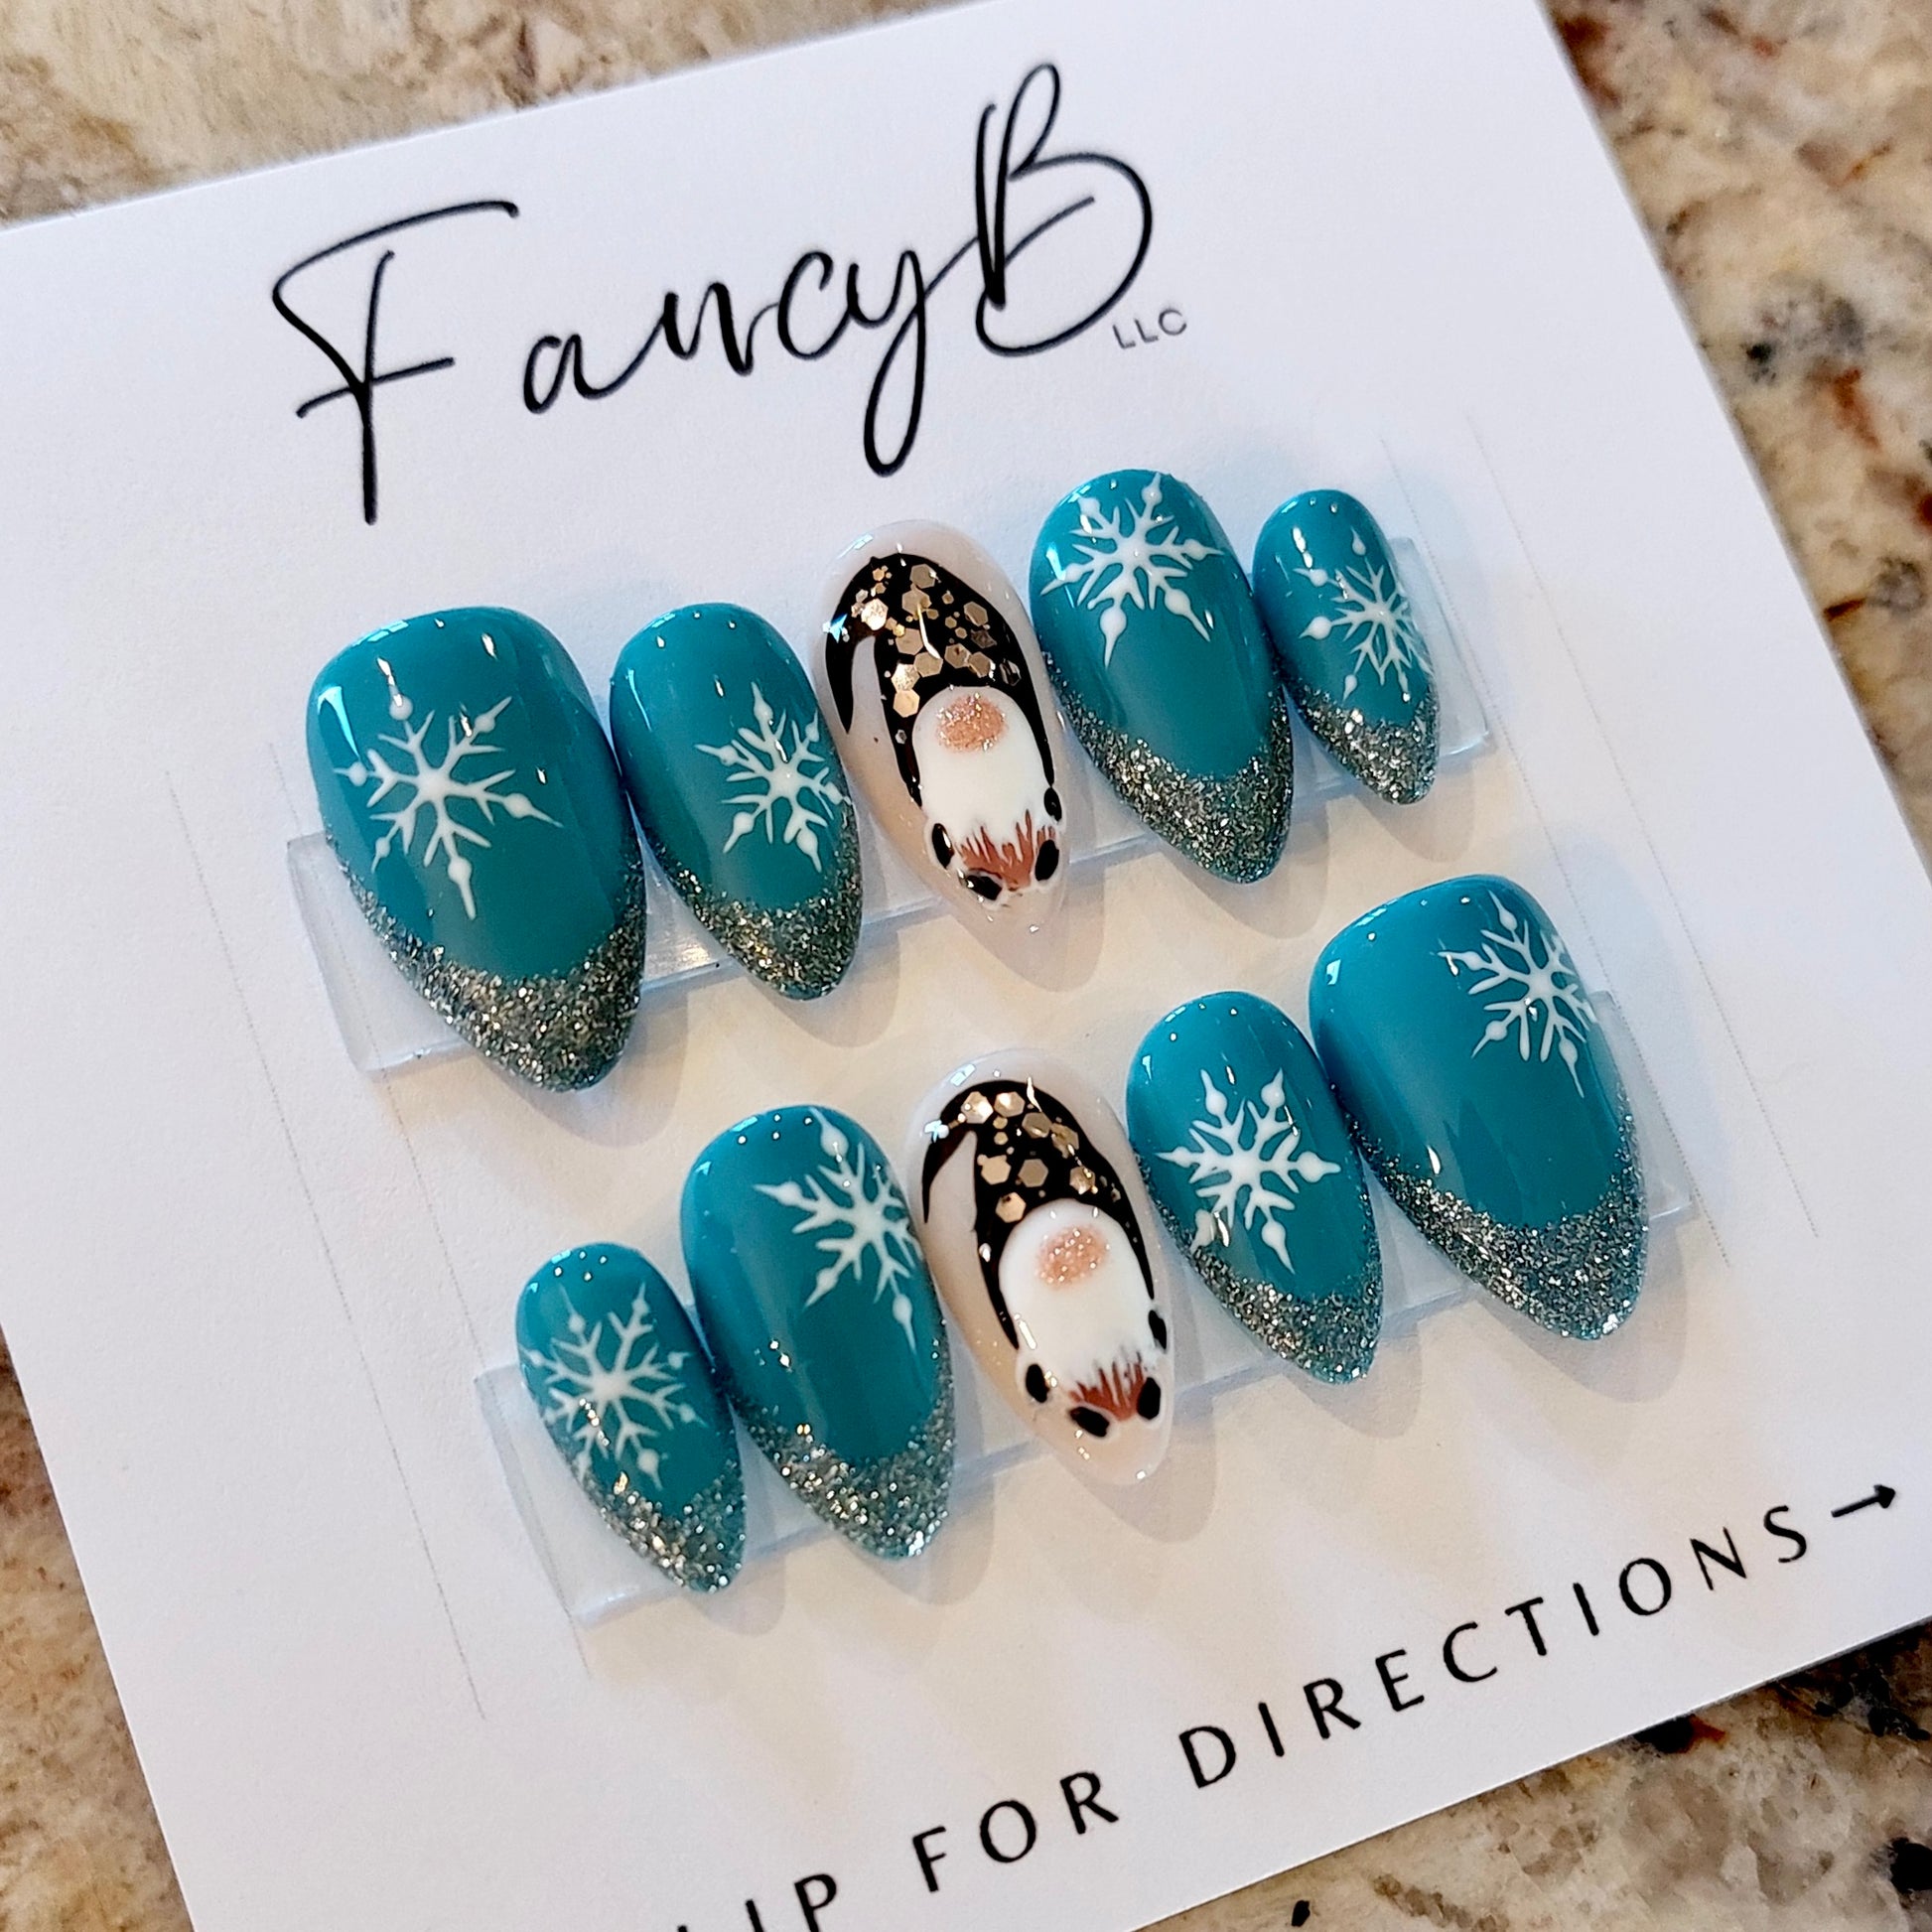 Custom press on nails gnome nails with snowflakes and glitter french tips on teal in a short almond shape. Winter snowflake press on nails fancyb nails.